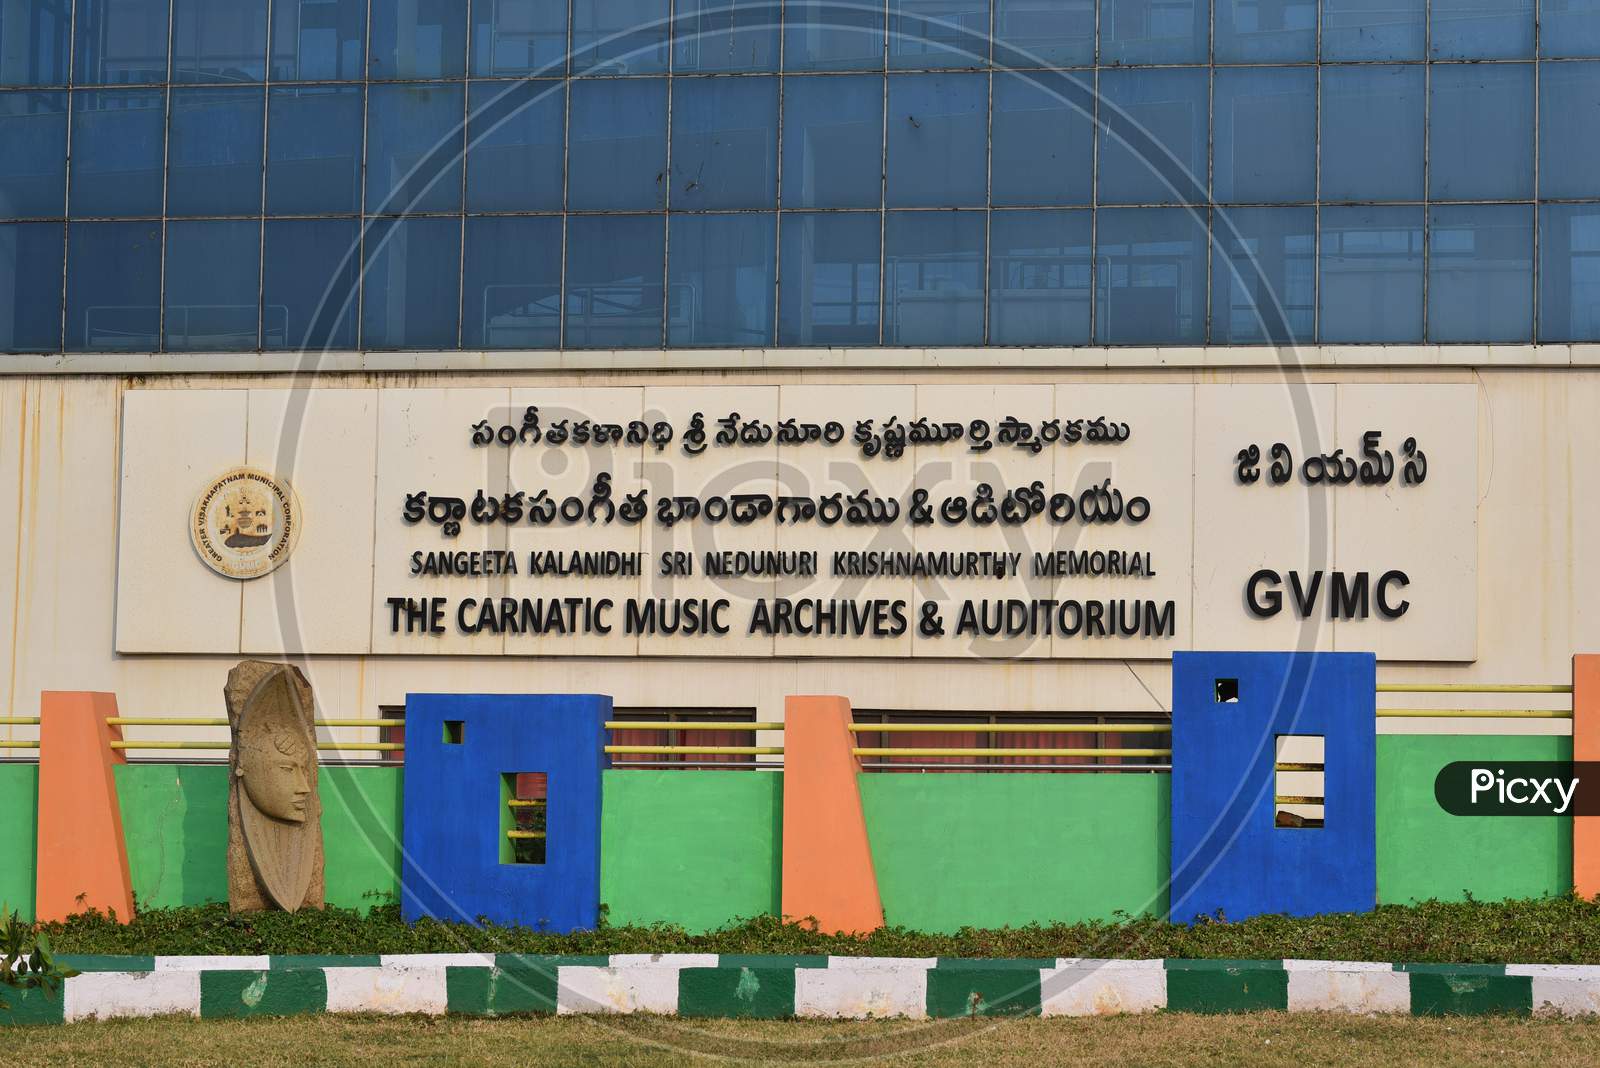 GVMC Carnatic music archives and museum